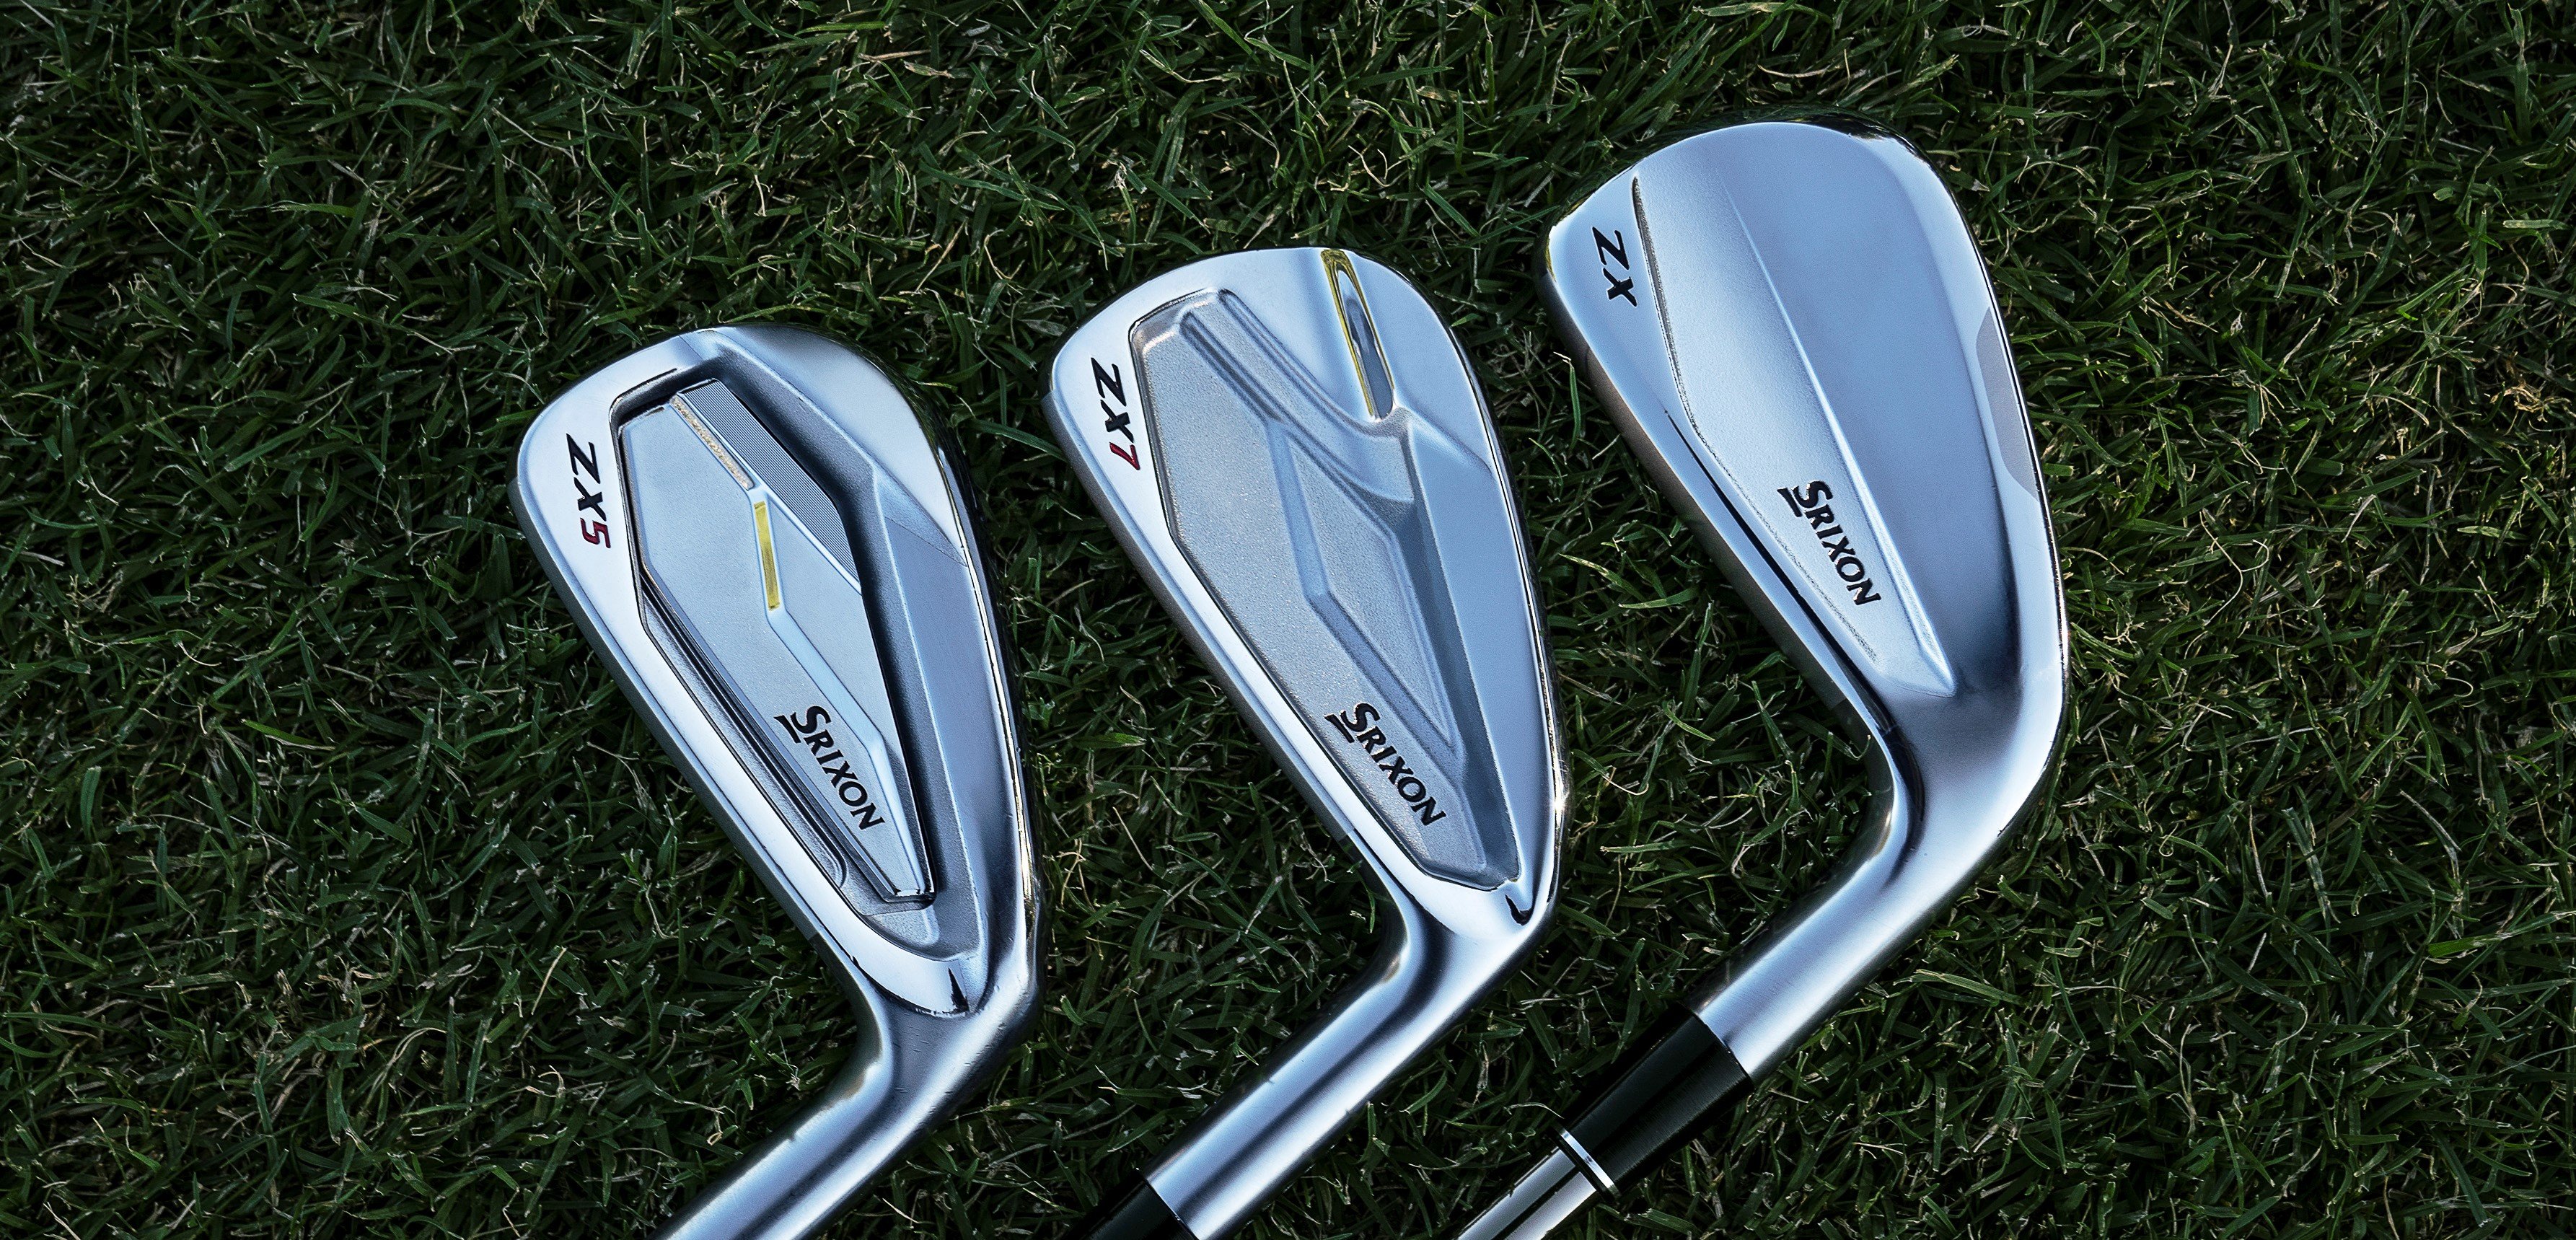 Srixon Zx Irons Why Upgrading Your Irons Will Improve Your Game